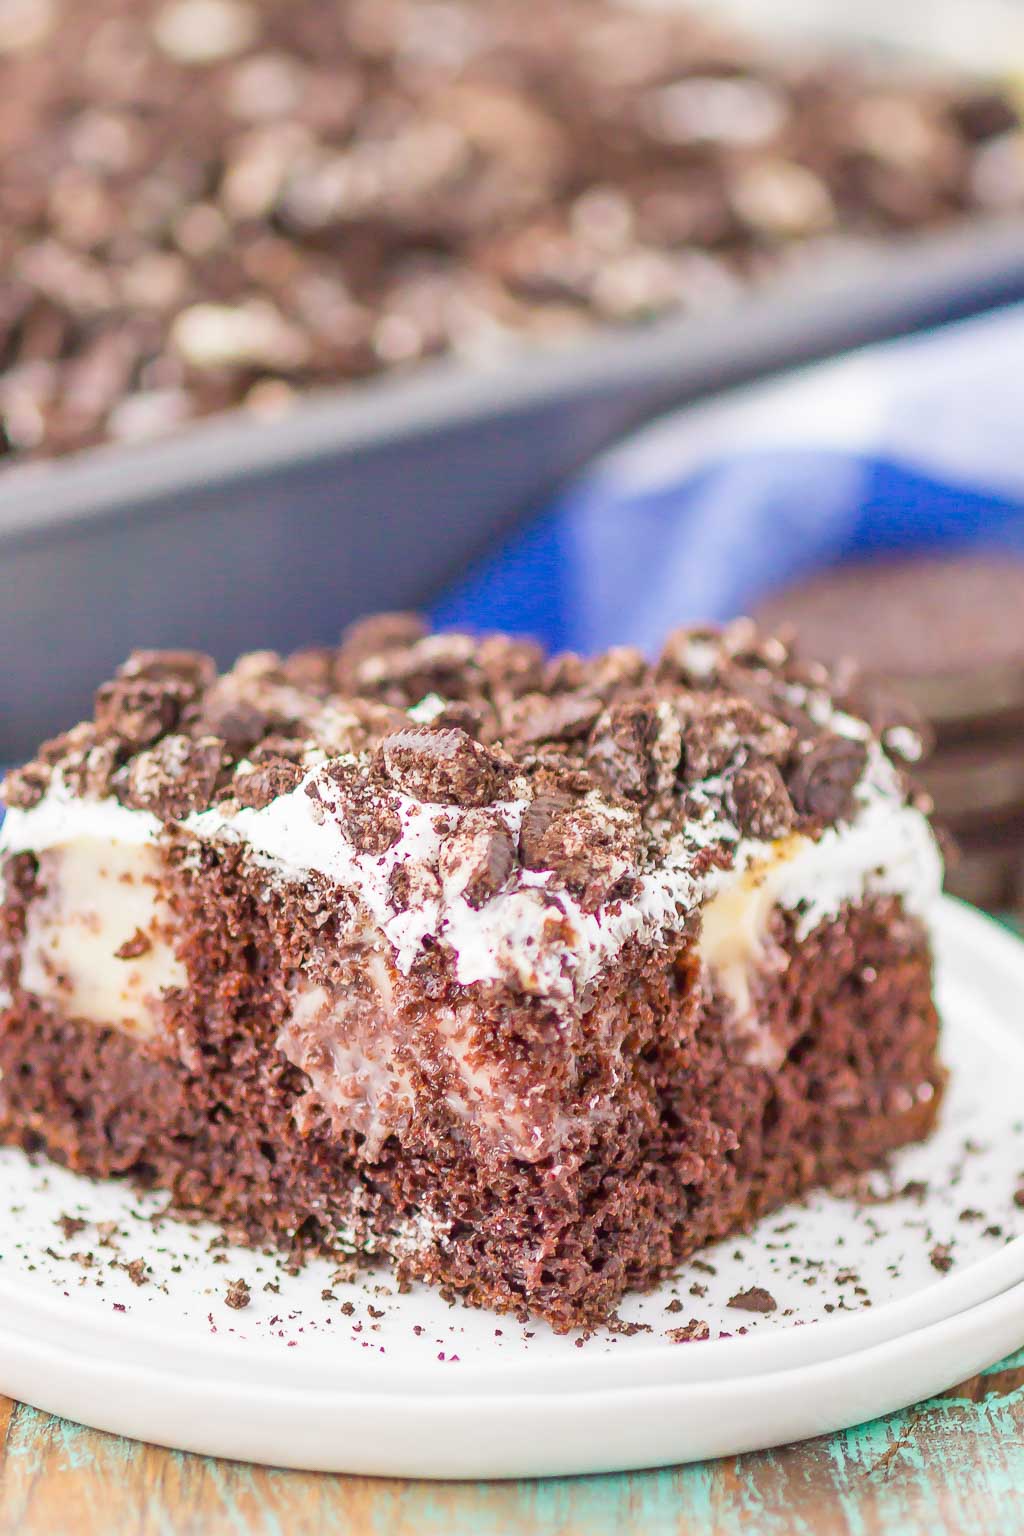 Oreo Pudding Poke Cake is chocolatey, fluffy, and simple to make. A fudgy cake is loaded with white chocolate pudding and studded with a creamy whipped topping and lots of Oreo cookies. The easiest, most delicious cake!Â 